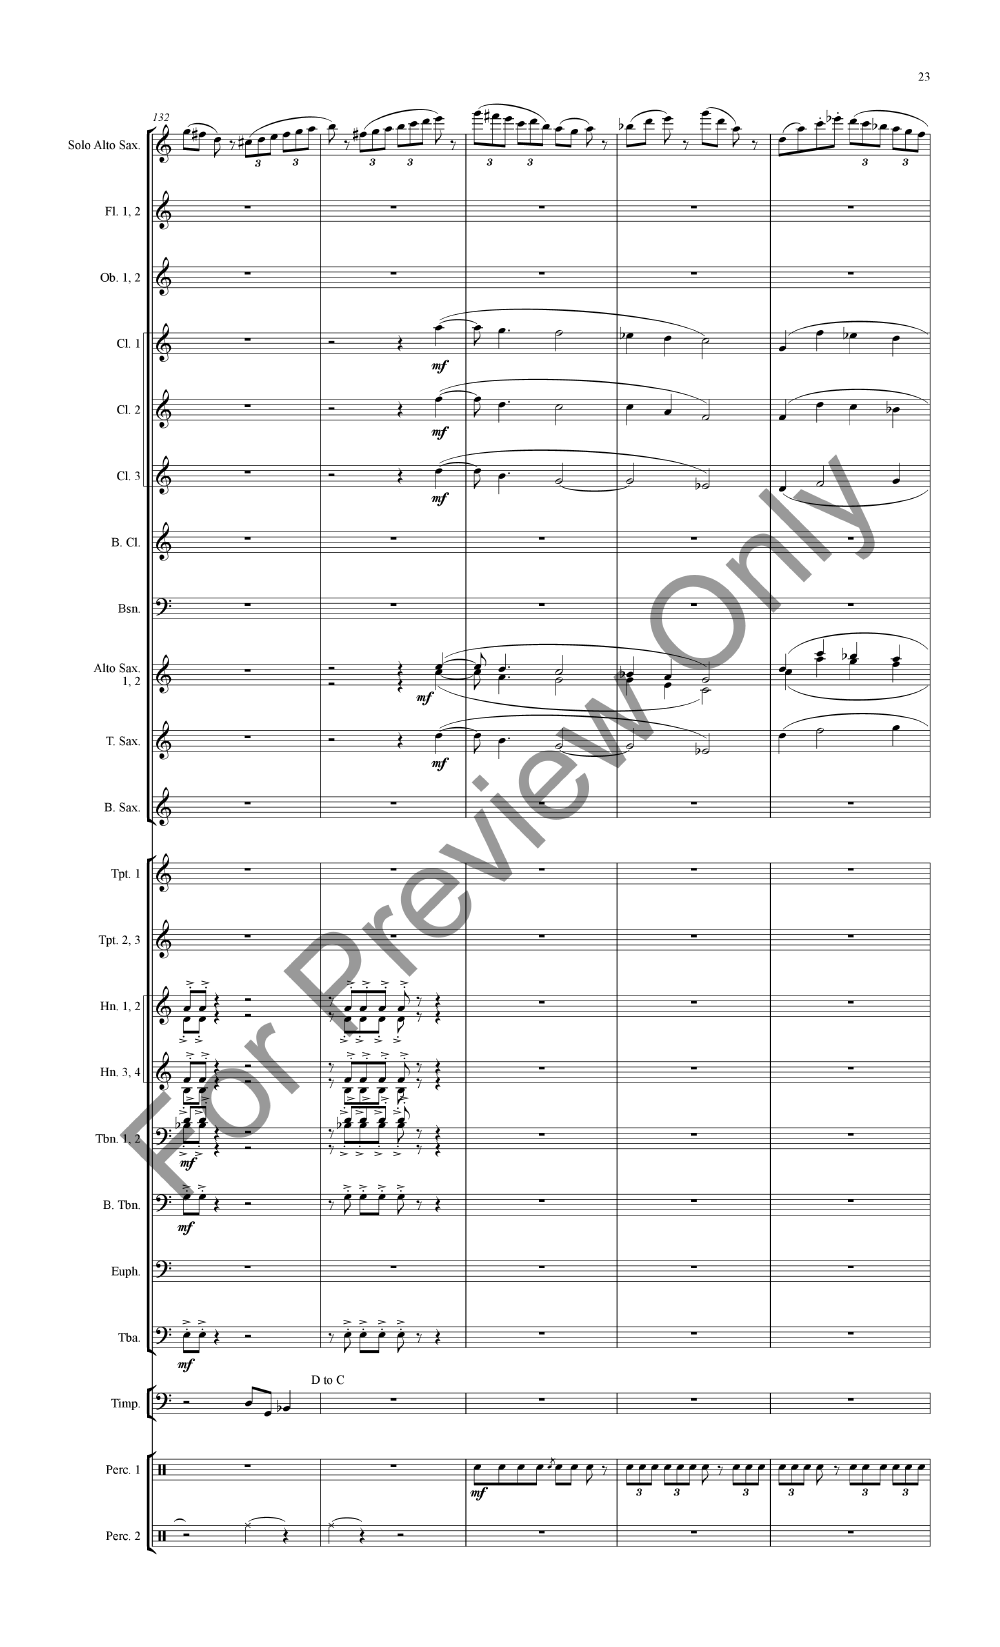 Concertino for Alto Saxophone and Band P.O.D.